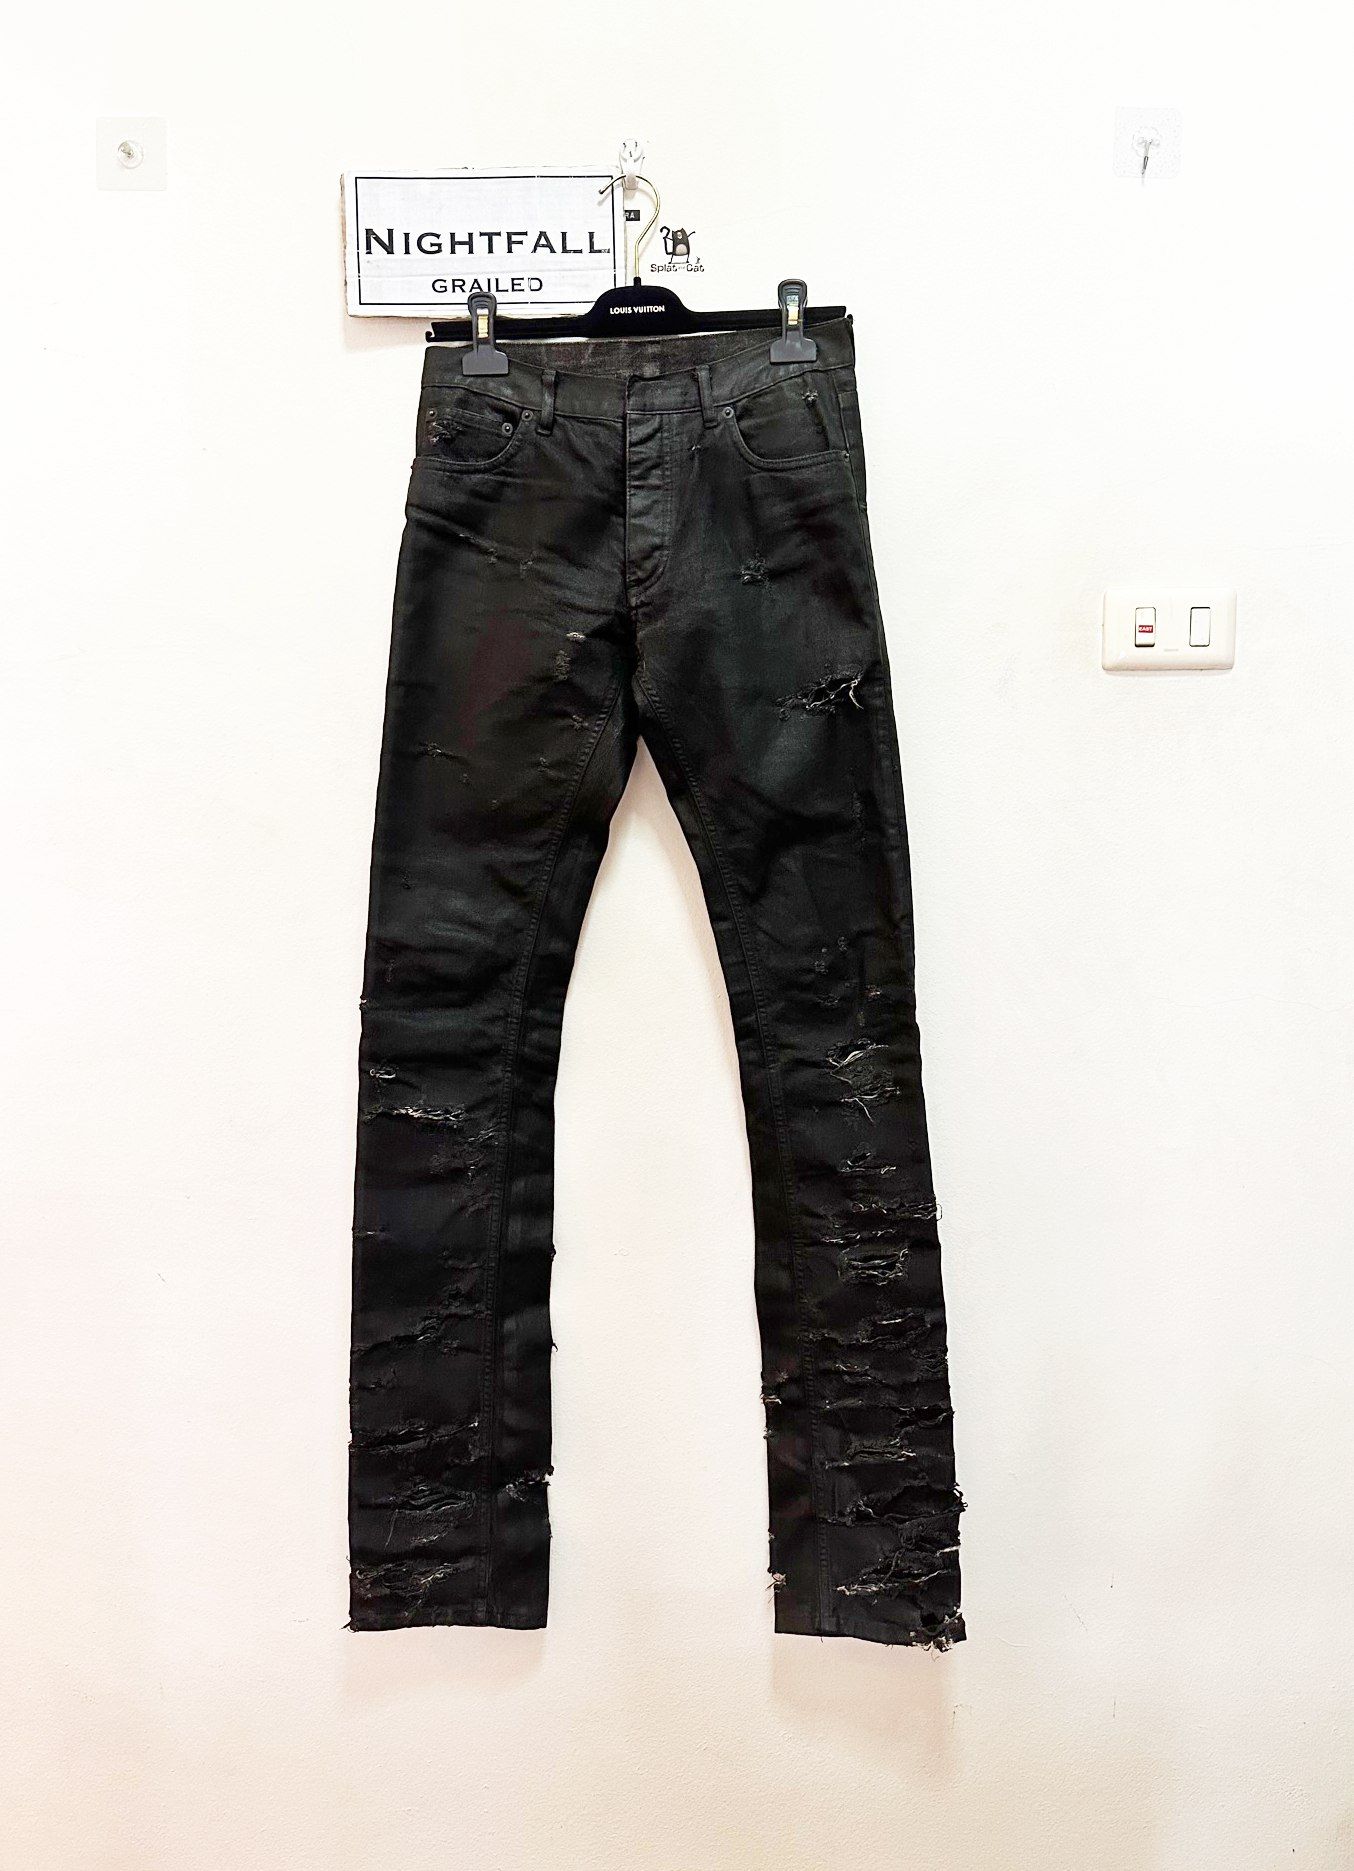 Dior [FINAL PRICE] Dior Homme SS04 Destroyed Waxed Jeans | Grailed